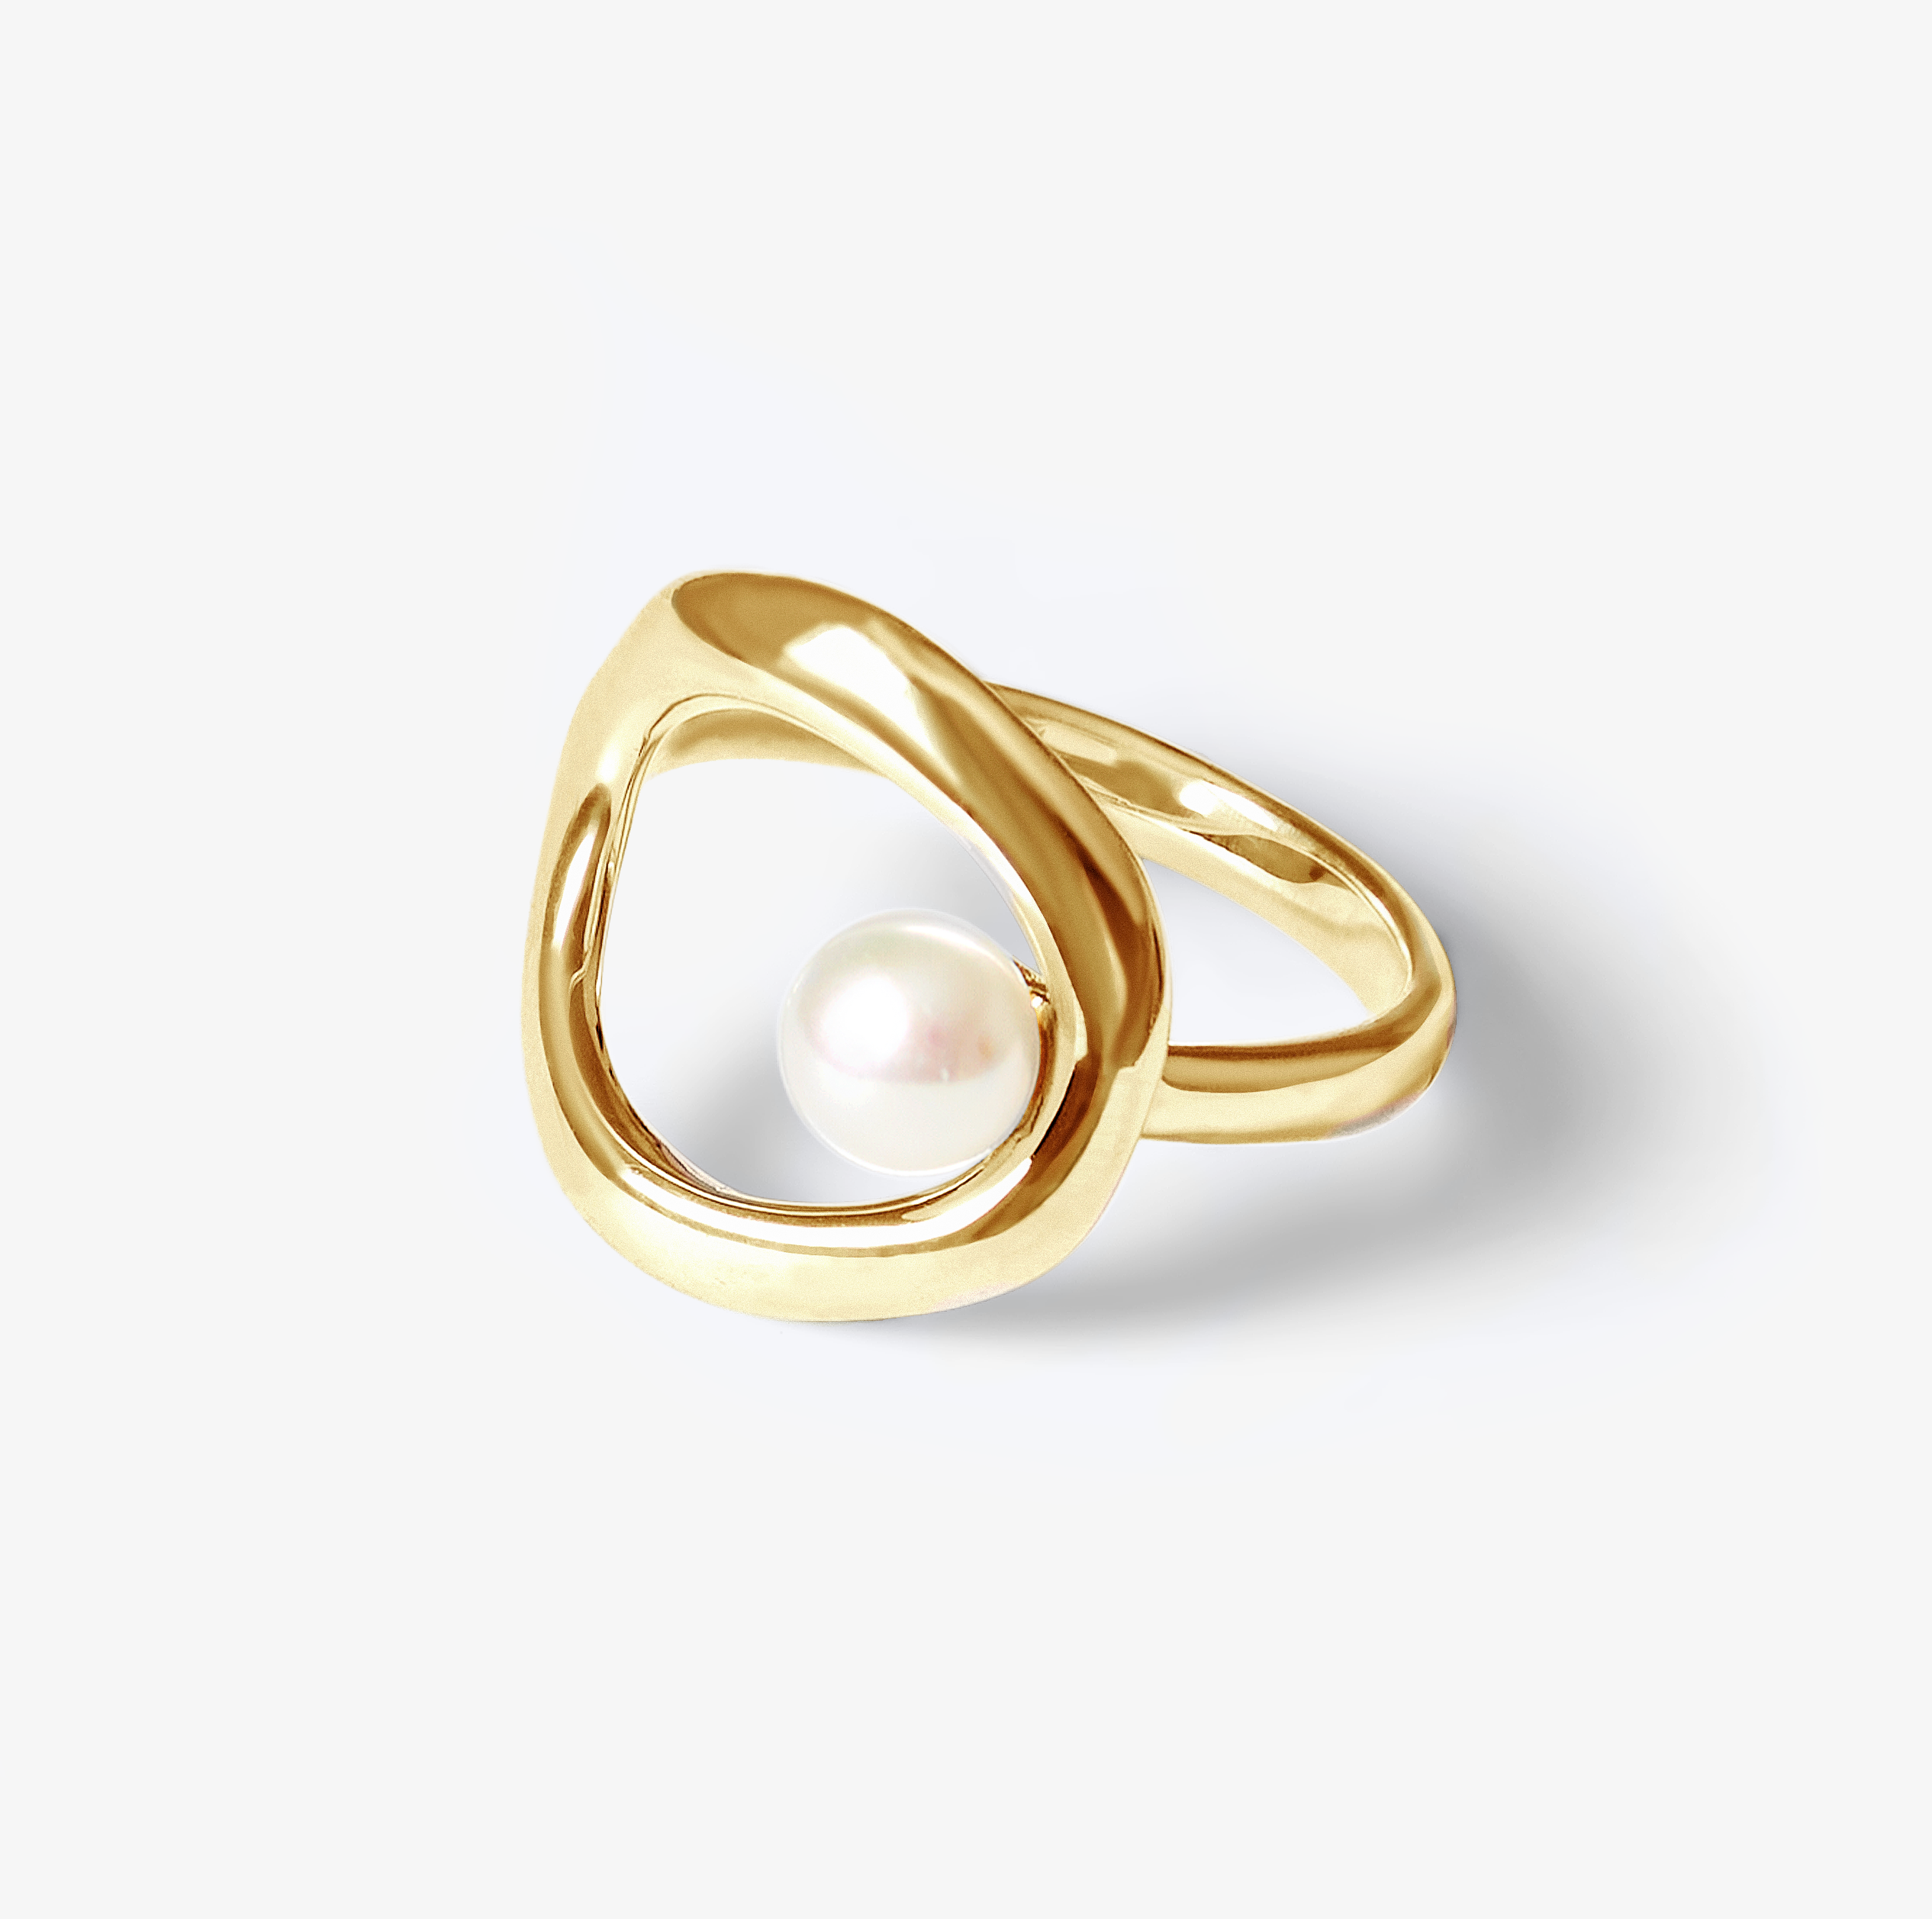 Pamplemousse Gold - Oceano Pearls